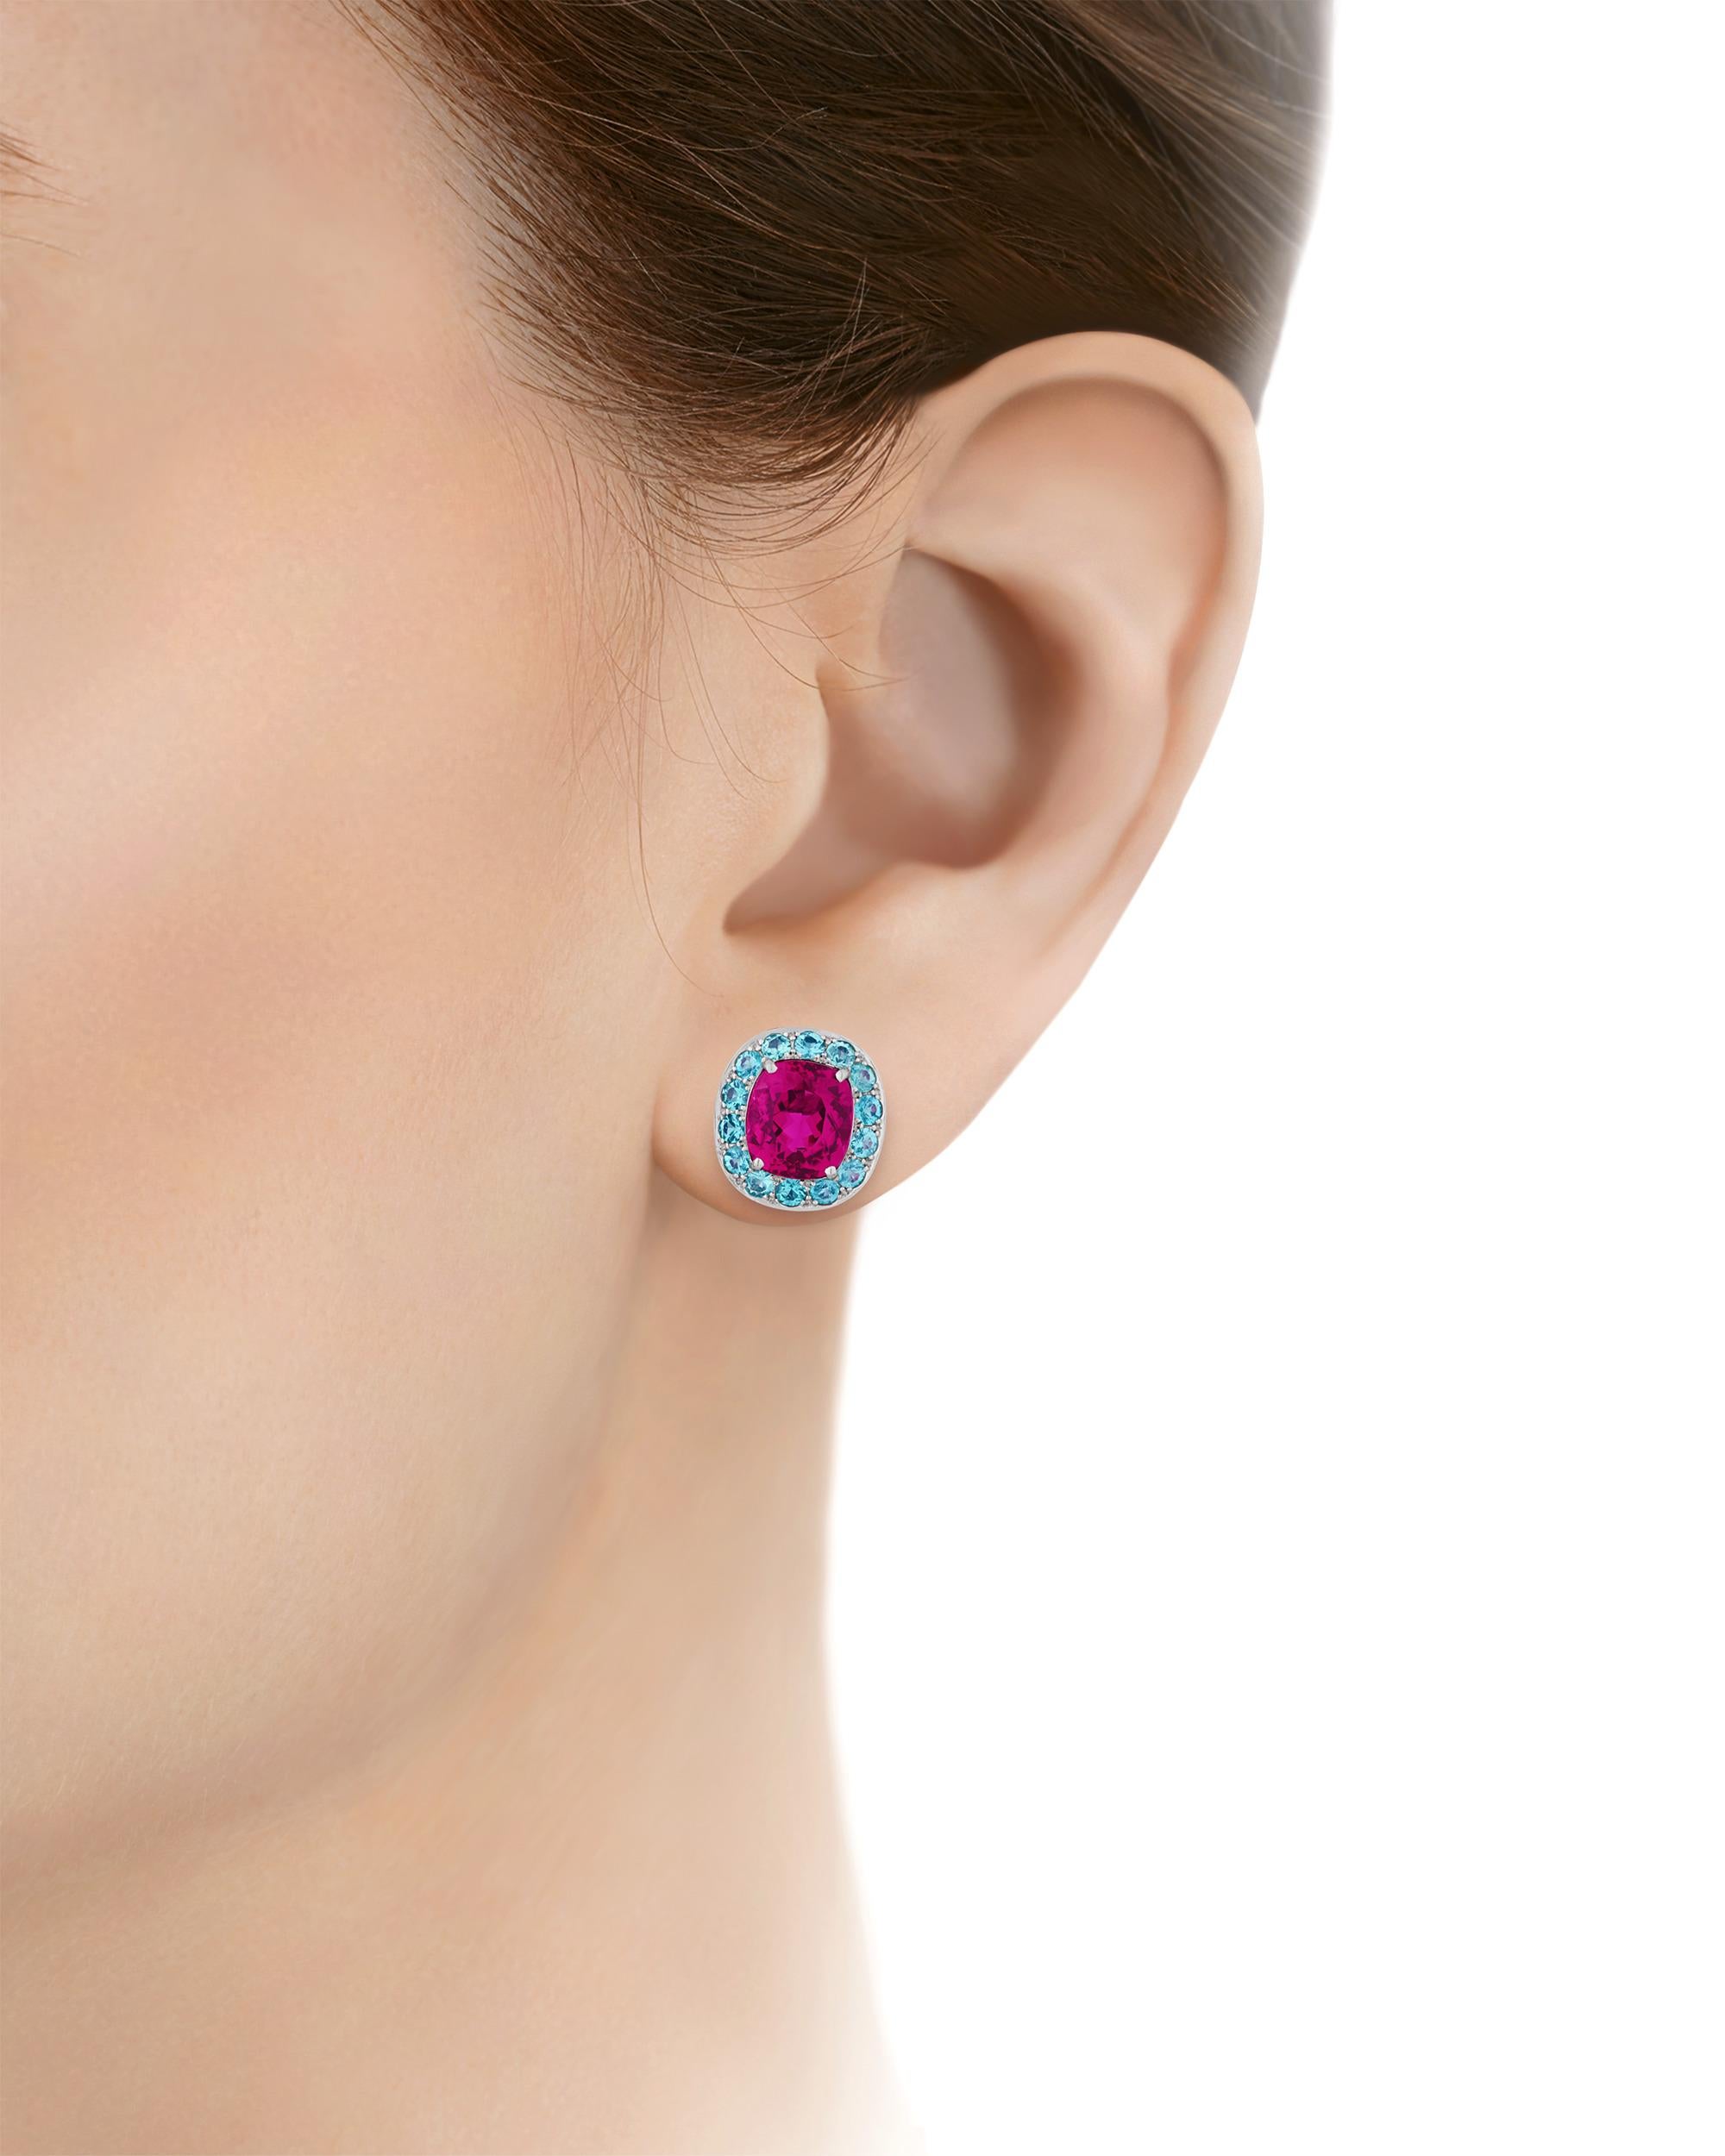 Modern Rubellite Earrings With Paraiba Accents By Oscar Heyman, 4.55 Carats For Sale